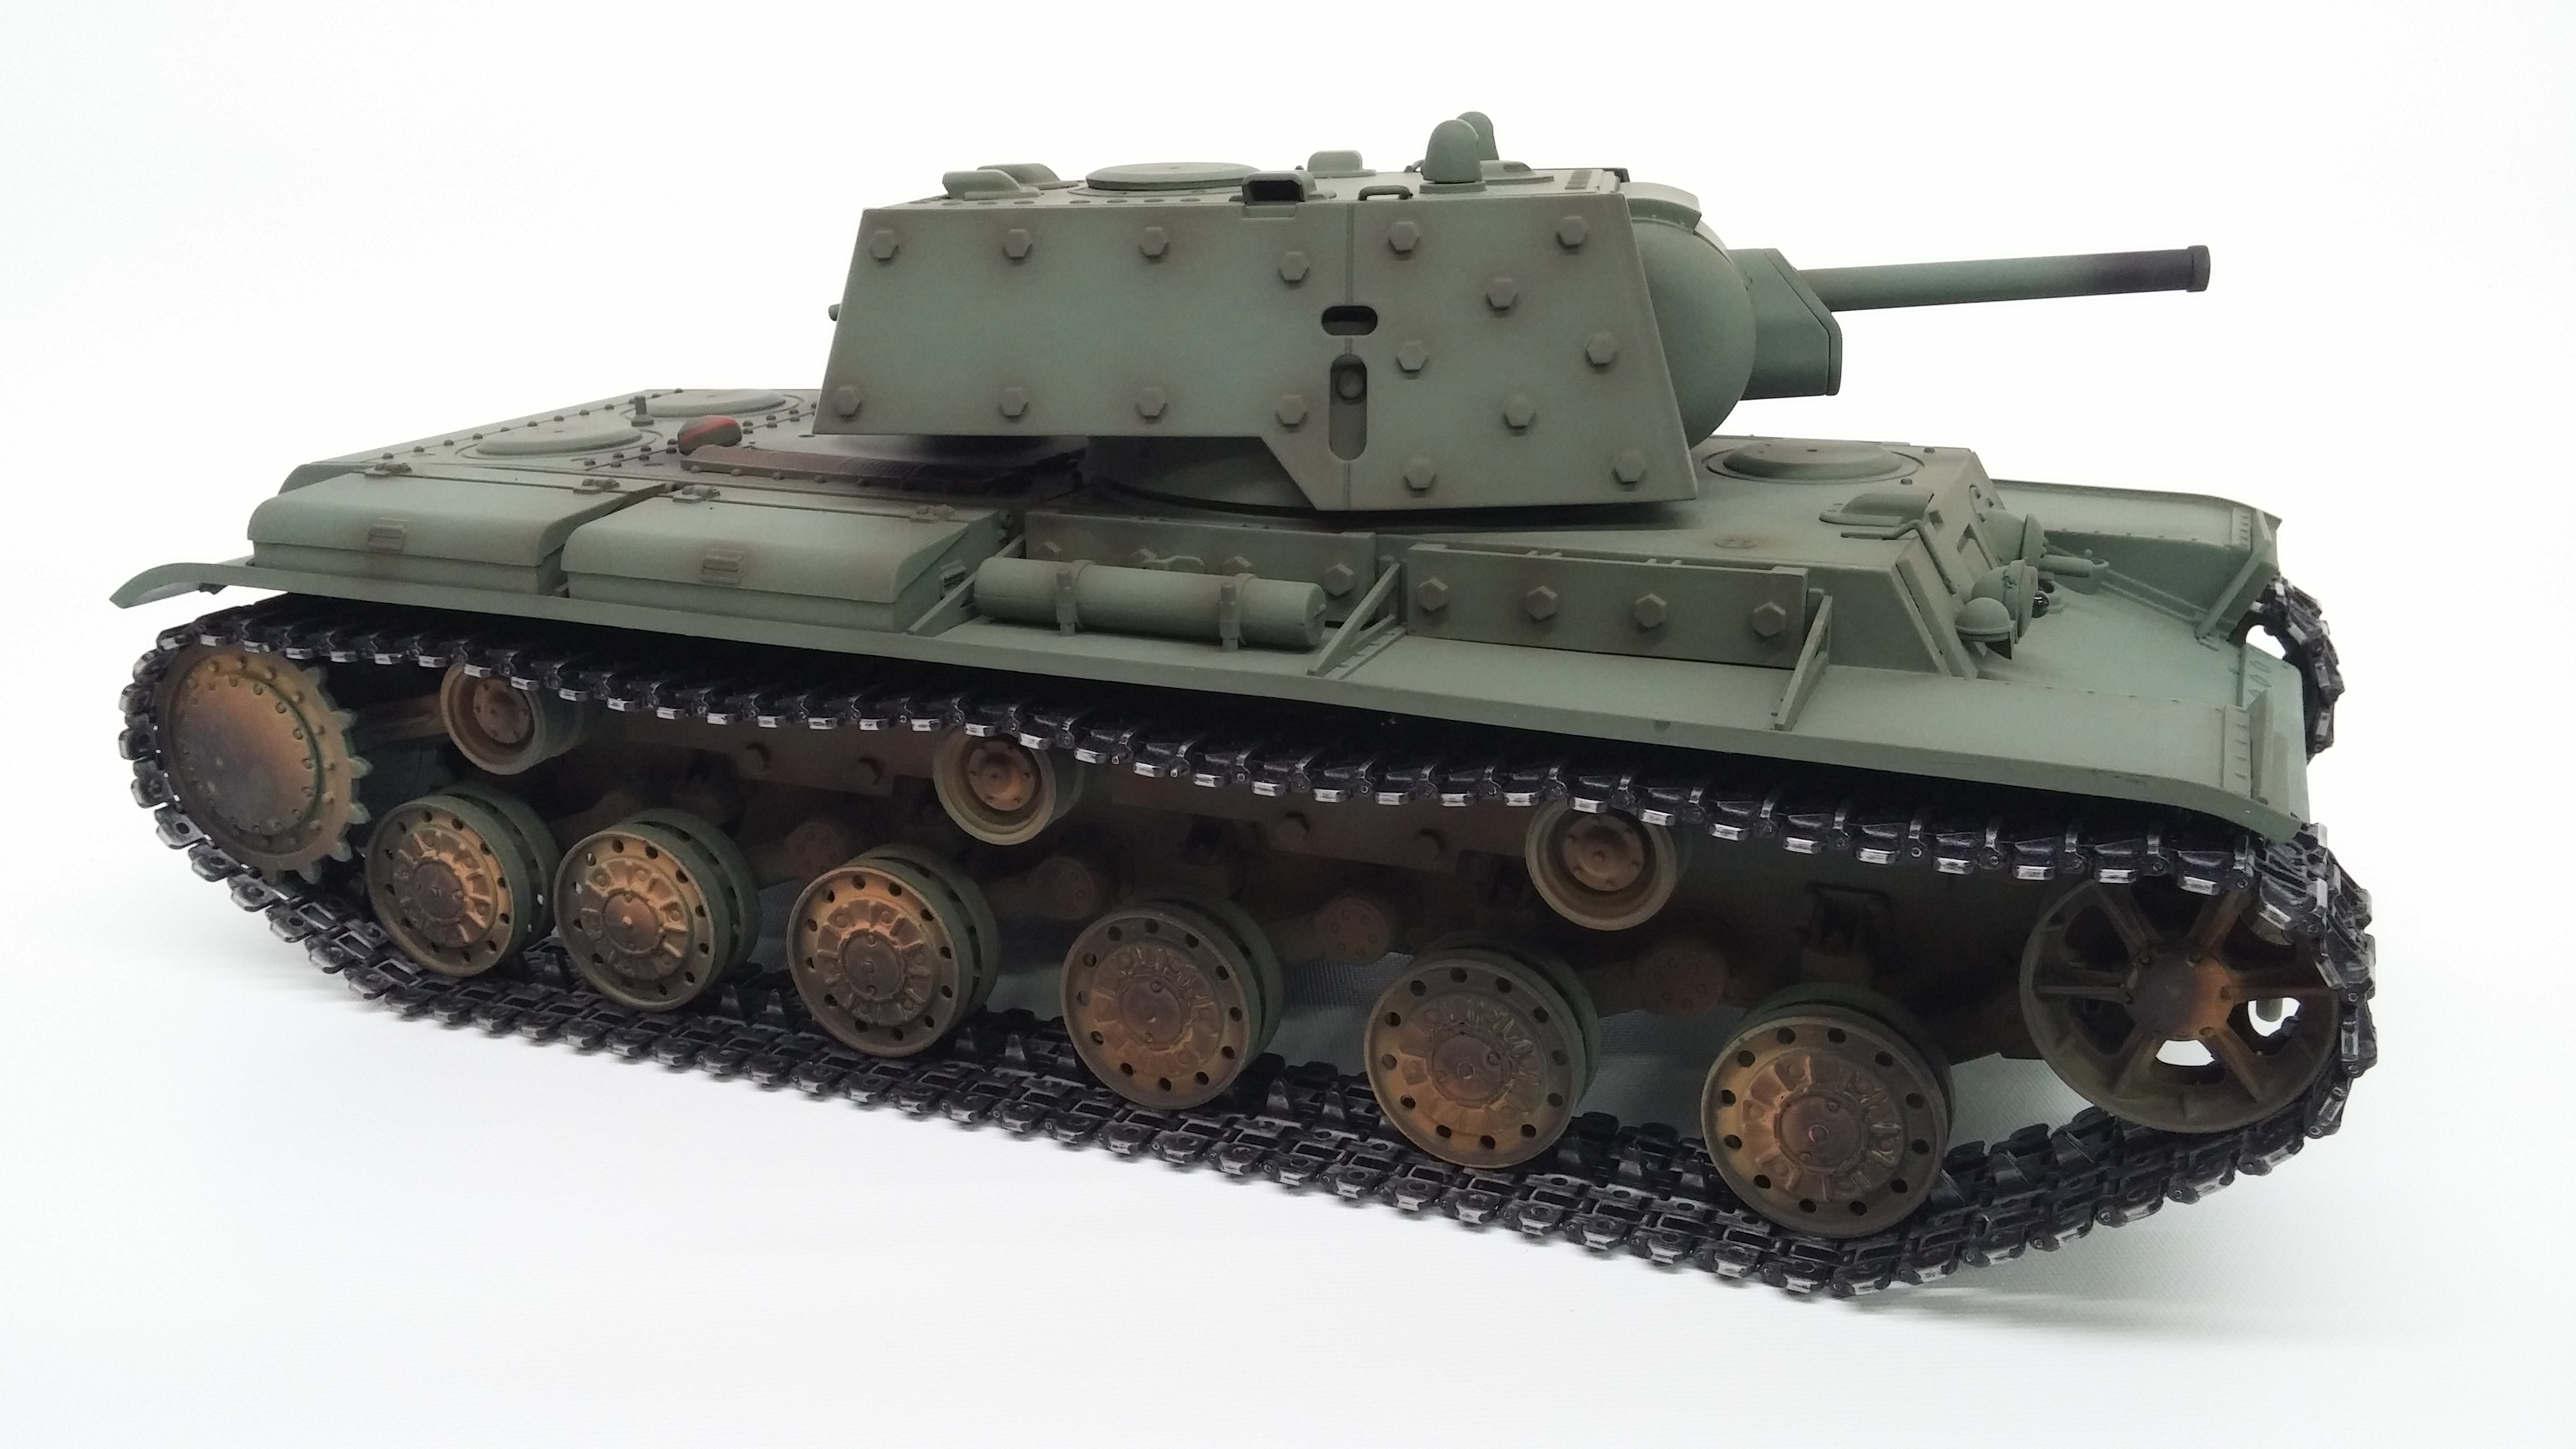 waltersons forces of valor 1/24 german panzer r/c tank